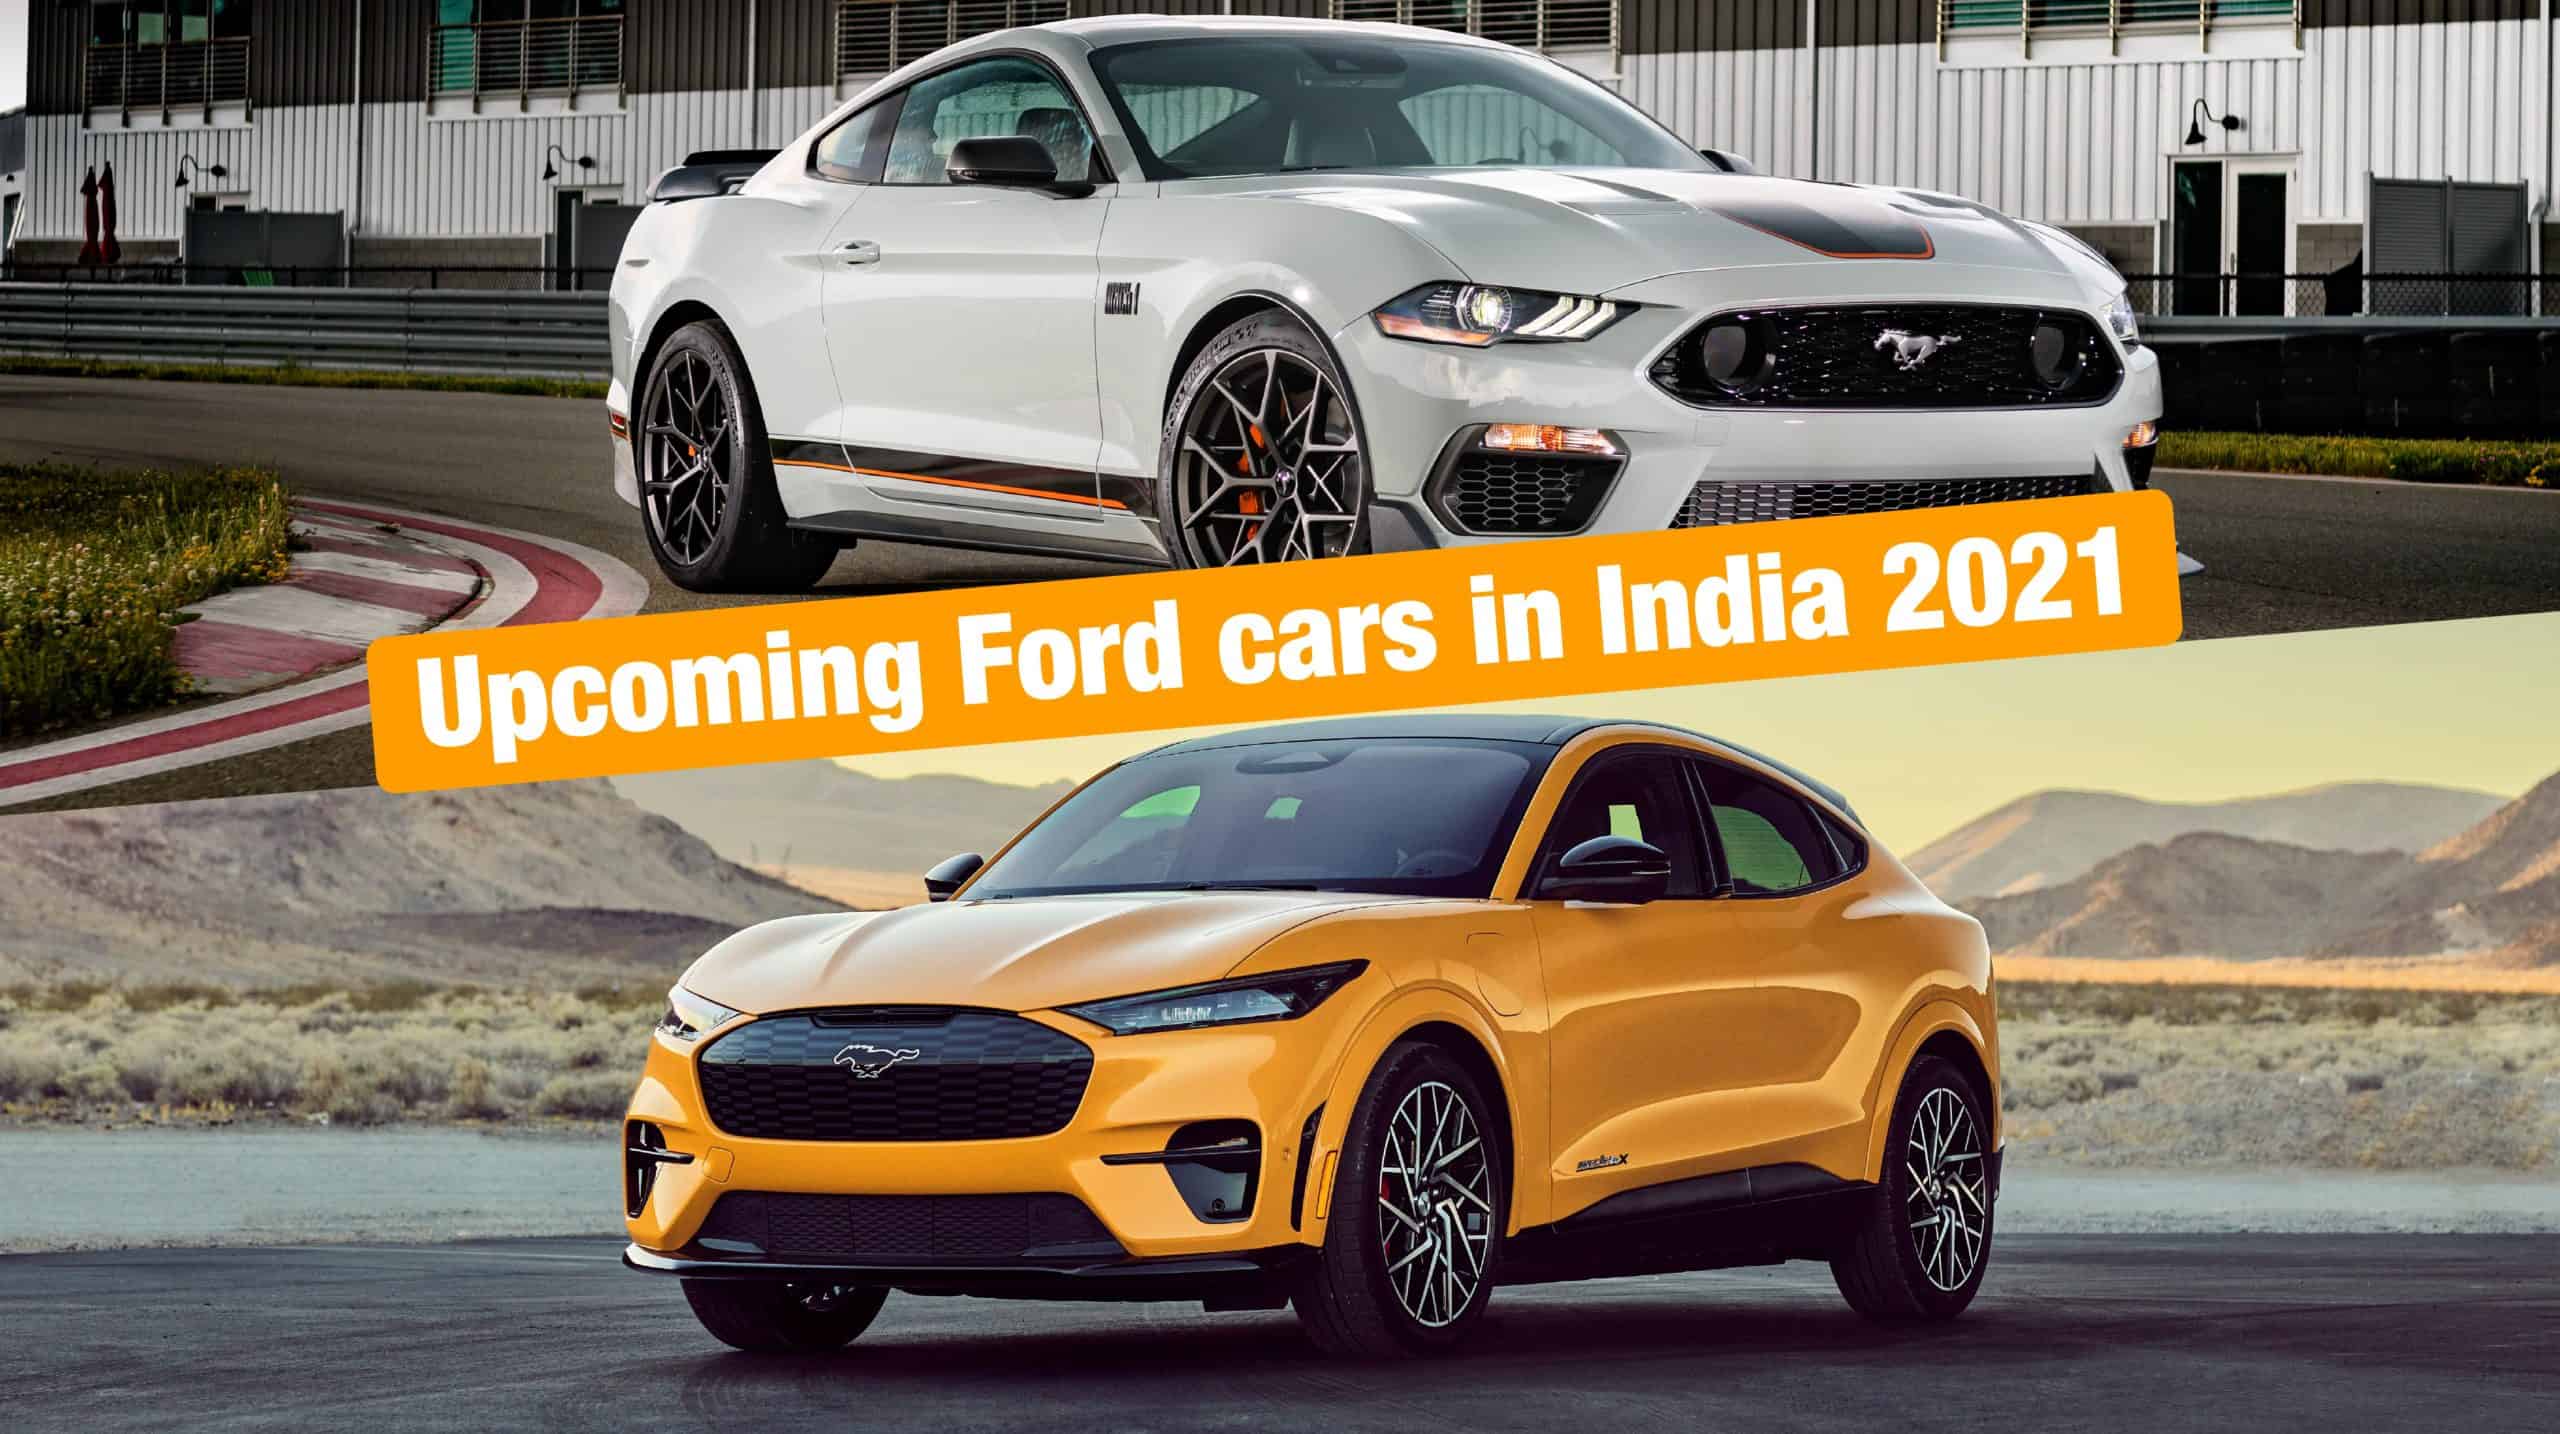 Upcoming Ford cars in India 2021 - Mustang Coupe and Mach-e|Upcoming Ford cars in India 2021 - Mustang Coupe and Mach-e